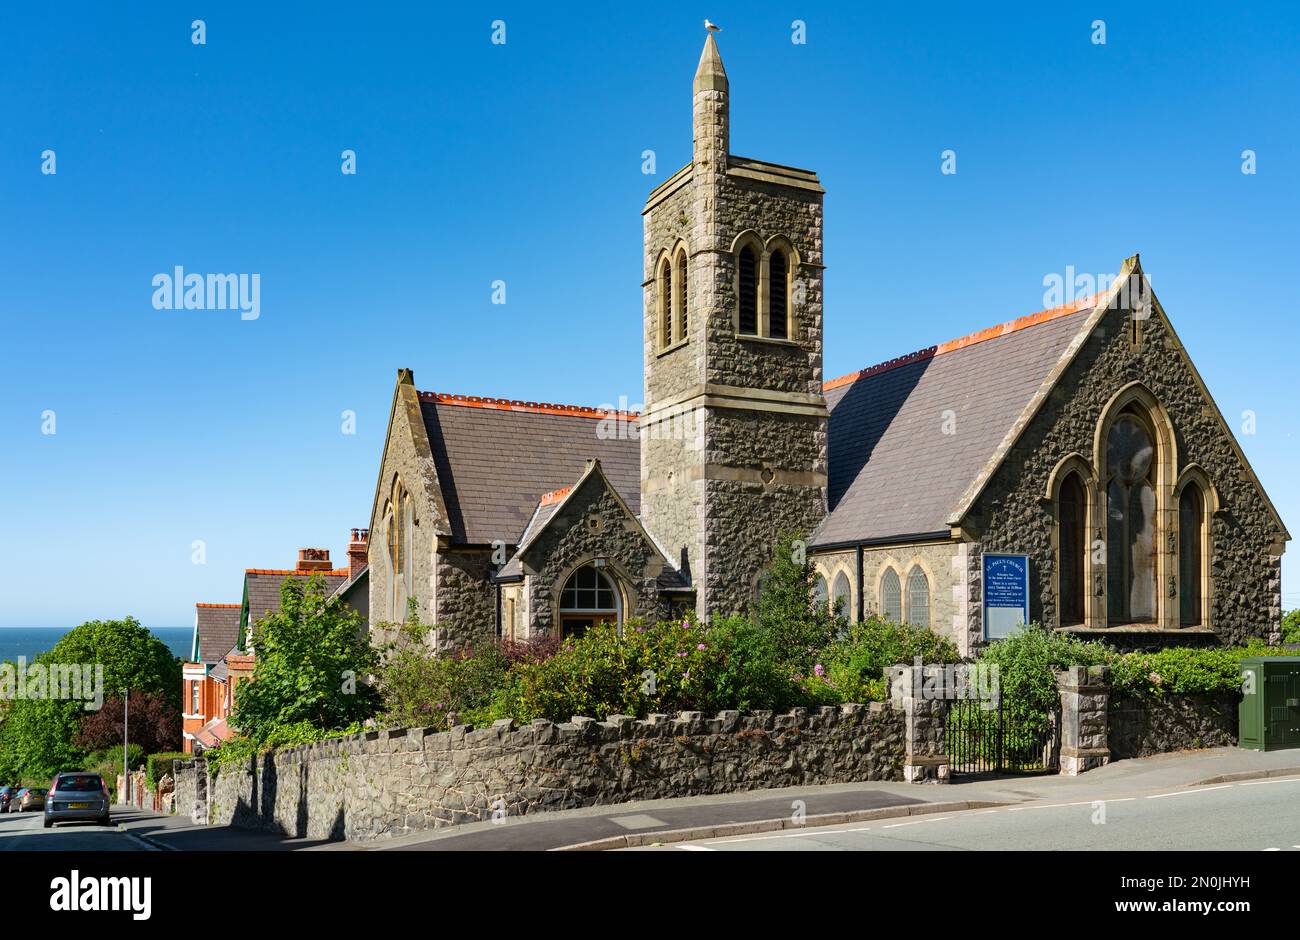 St Paul's Church, Penmaenmawr, North Wales. Image taken in May 2022. Stock Photo